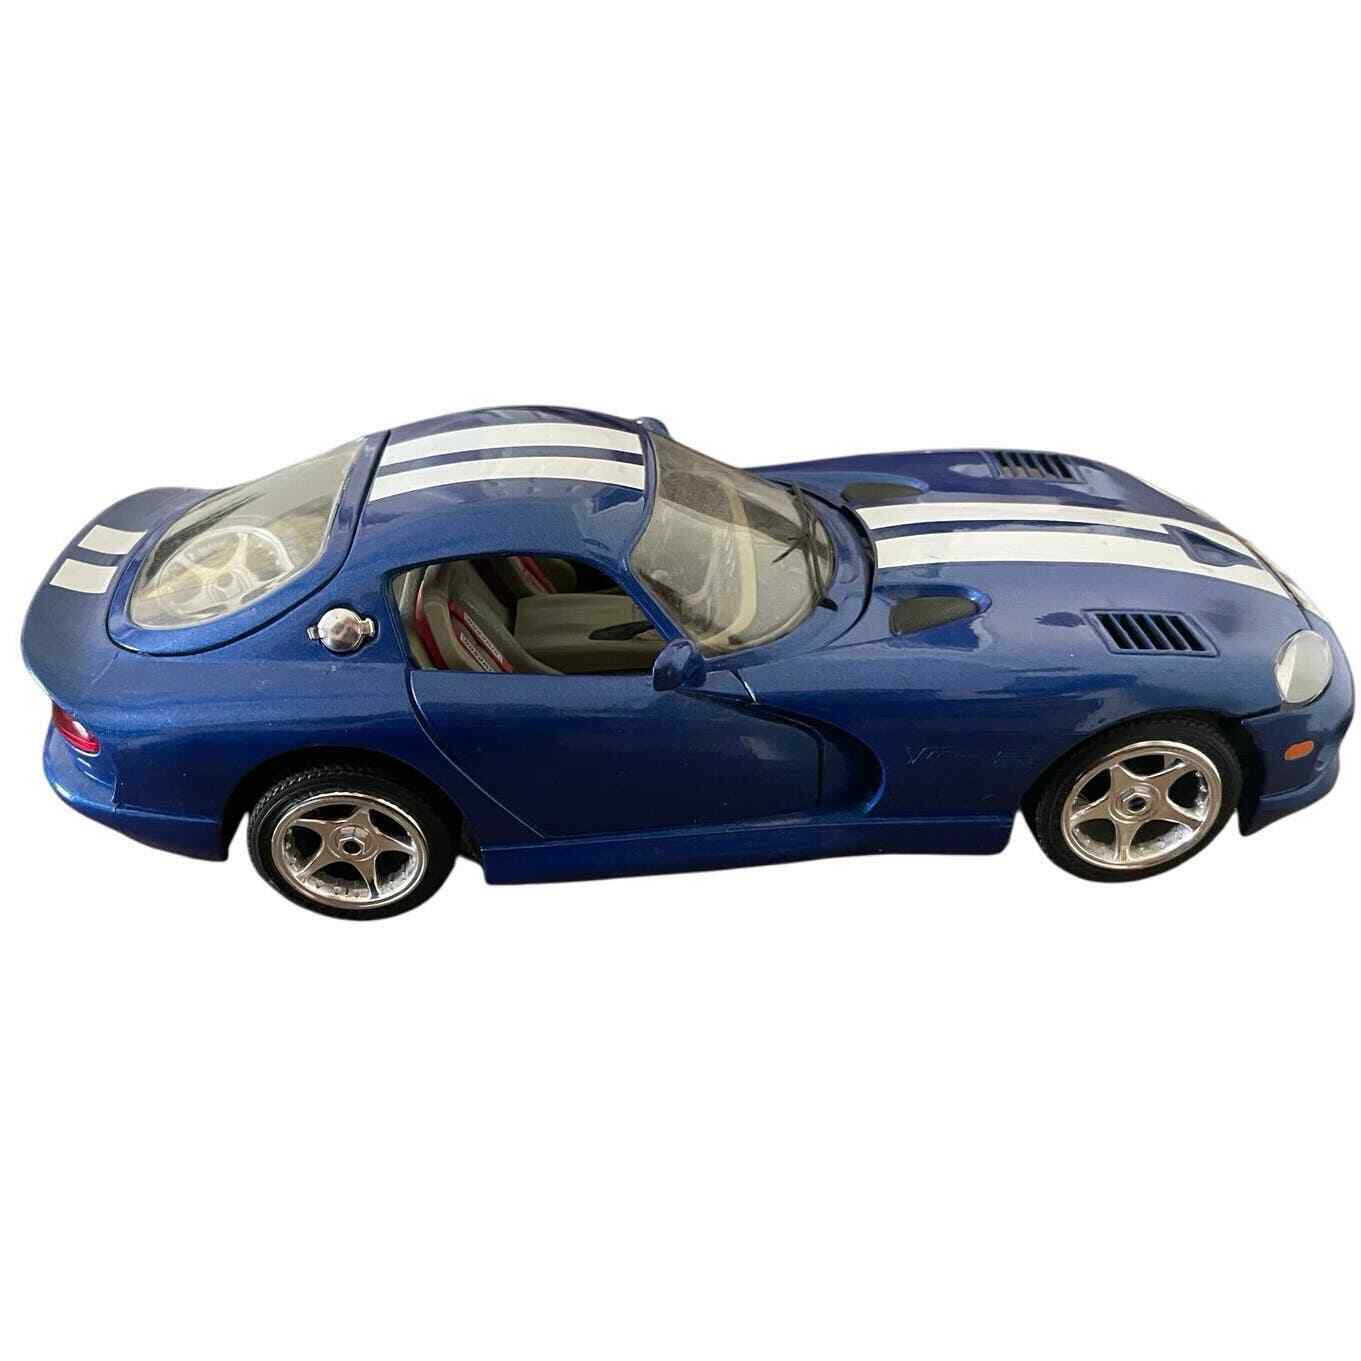 Burago Dodge Viper GTS Coupe Die Cast Metal Sports Car Blue with White Stripes